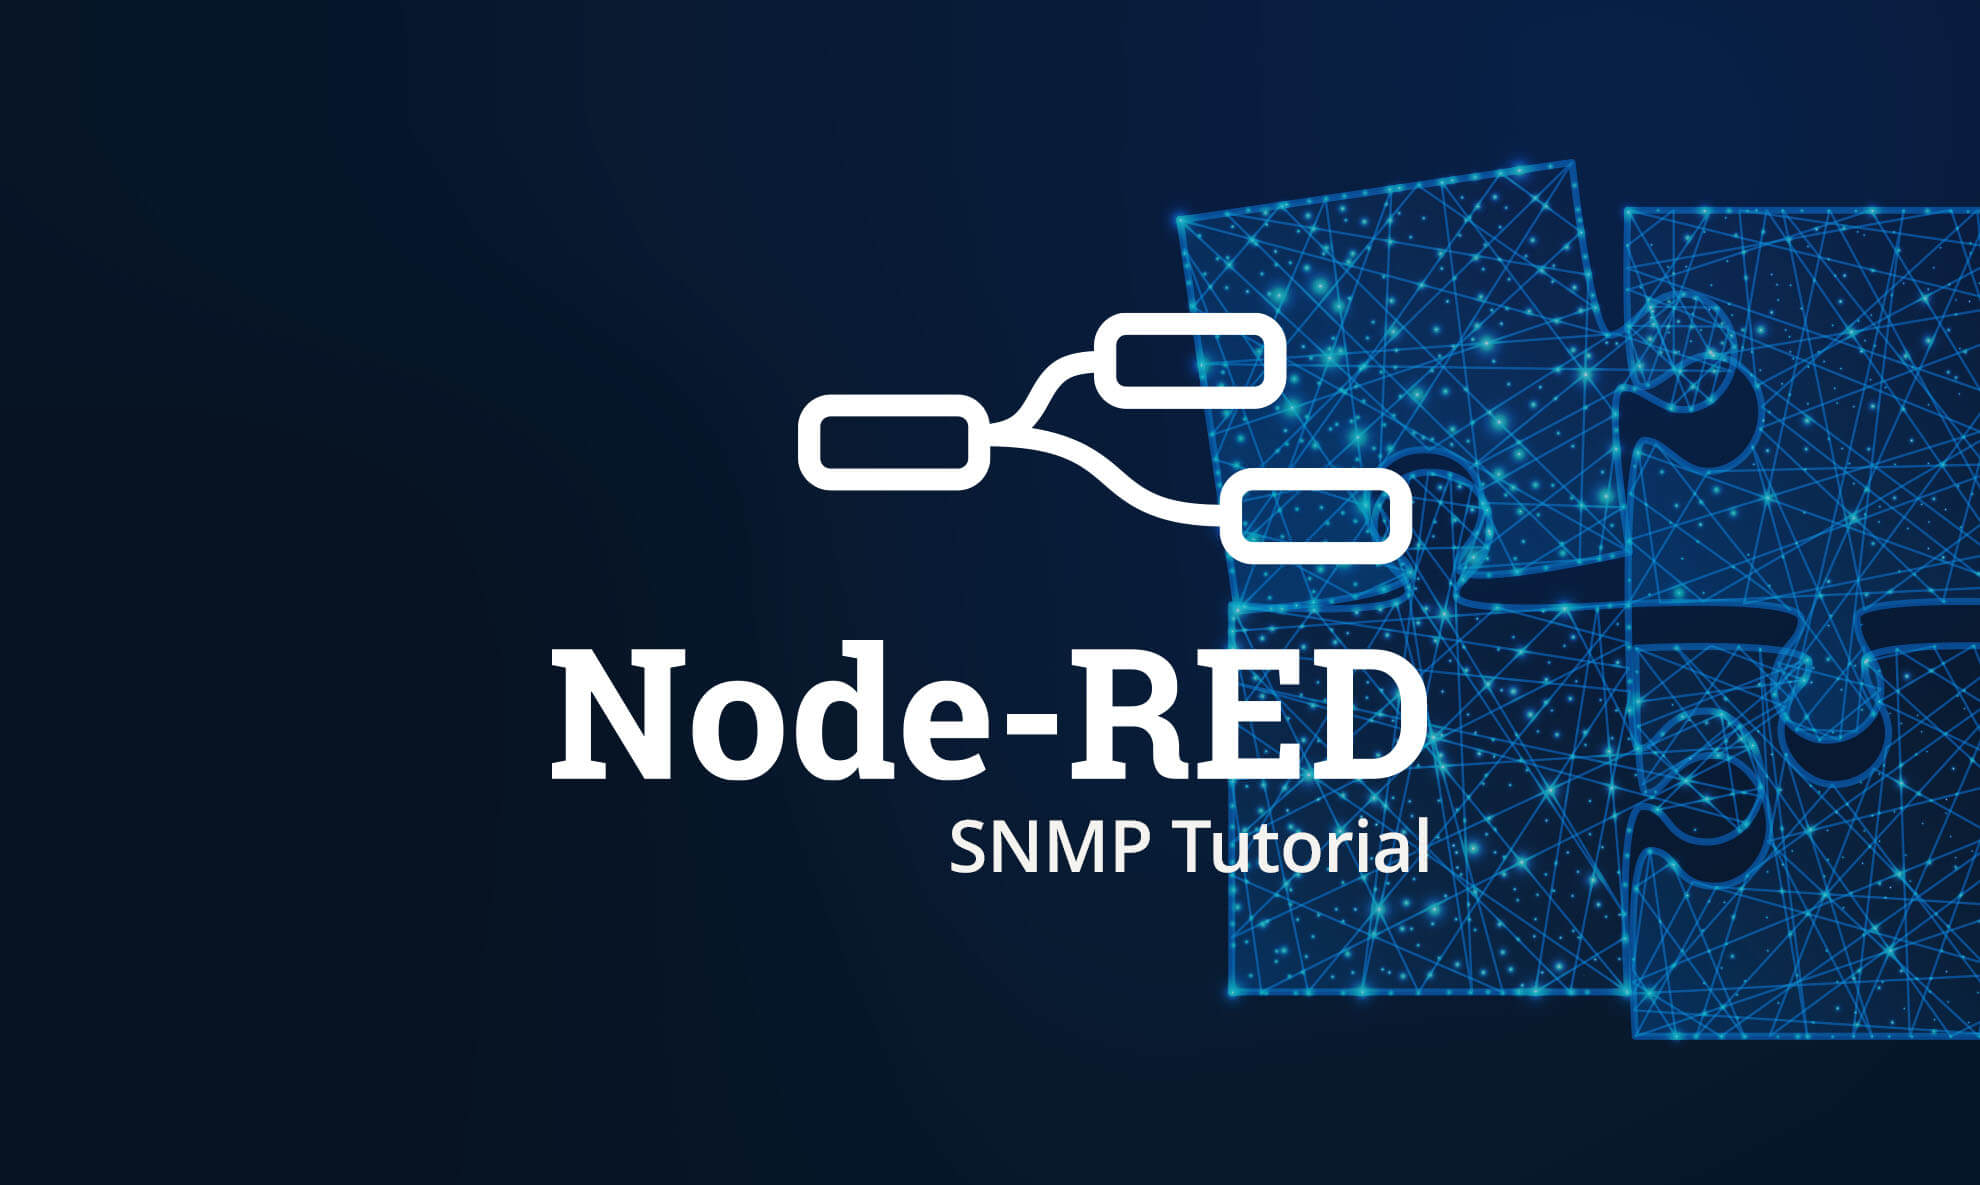 Node-RED SNMP tutorial